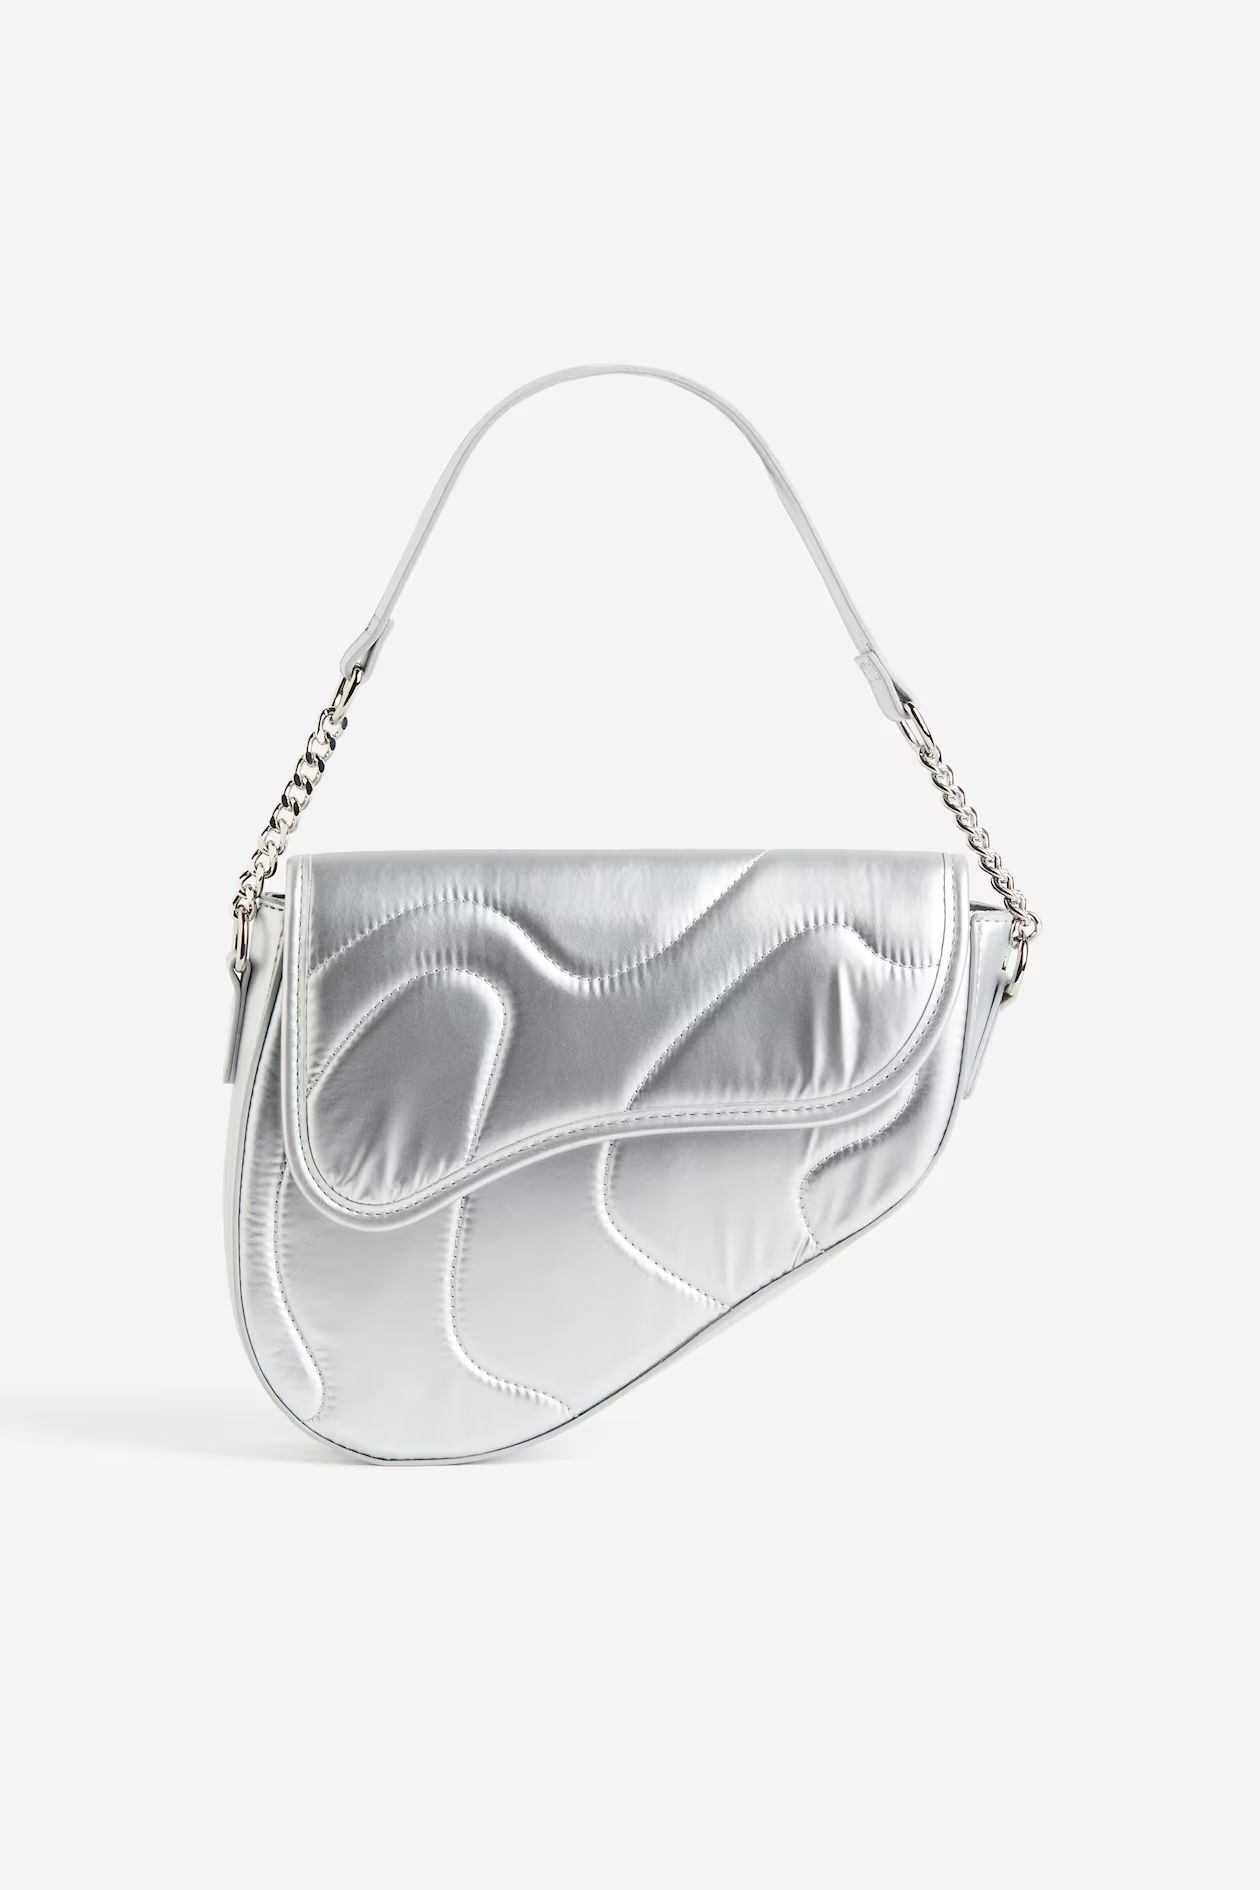 The Fox Saddle-schultertasche In Silber - Silber Nylon - Ladies | H&M AT | H&M (DE, AT, CH, NL, FI)